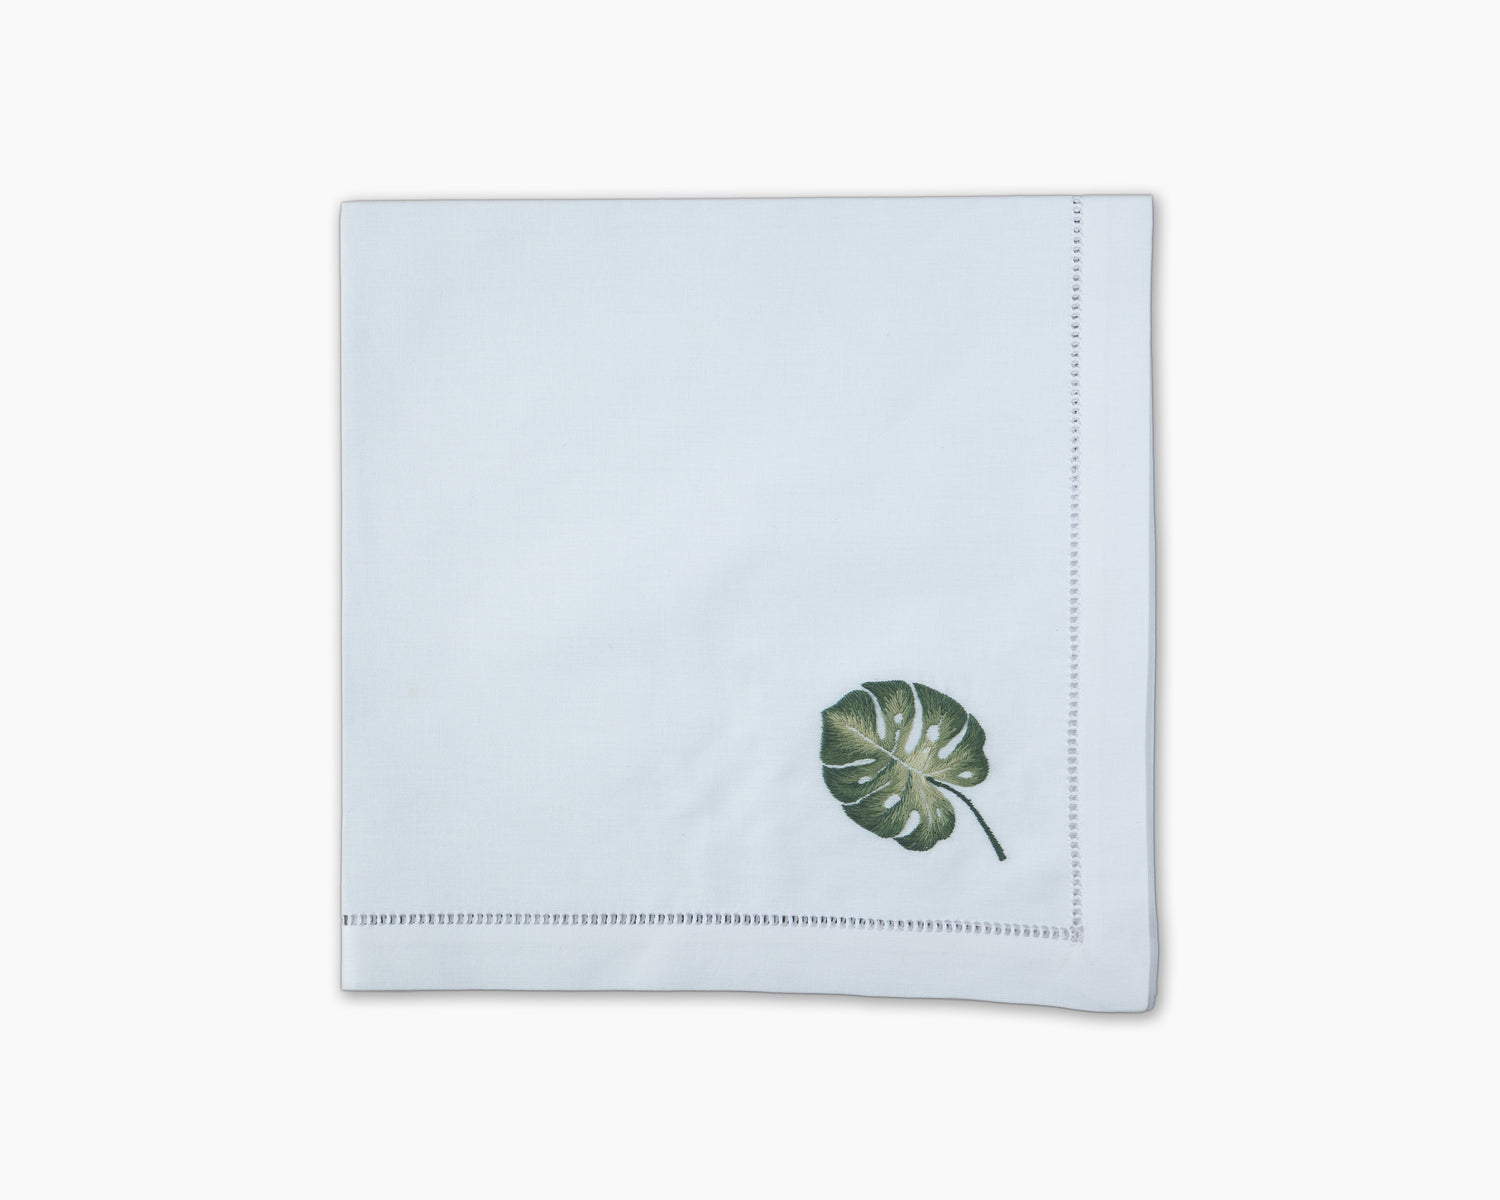 A Tropical Leaf Napkin with a green leaf on it by Henry Handwork.